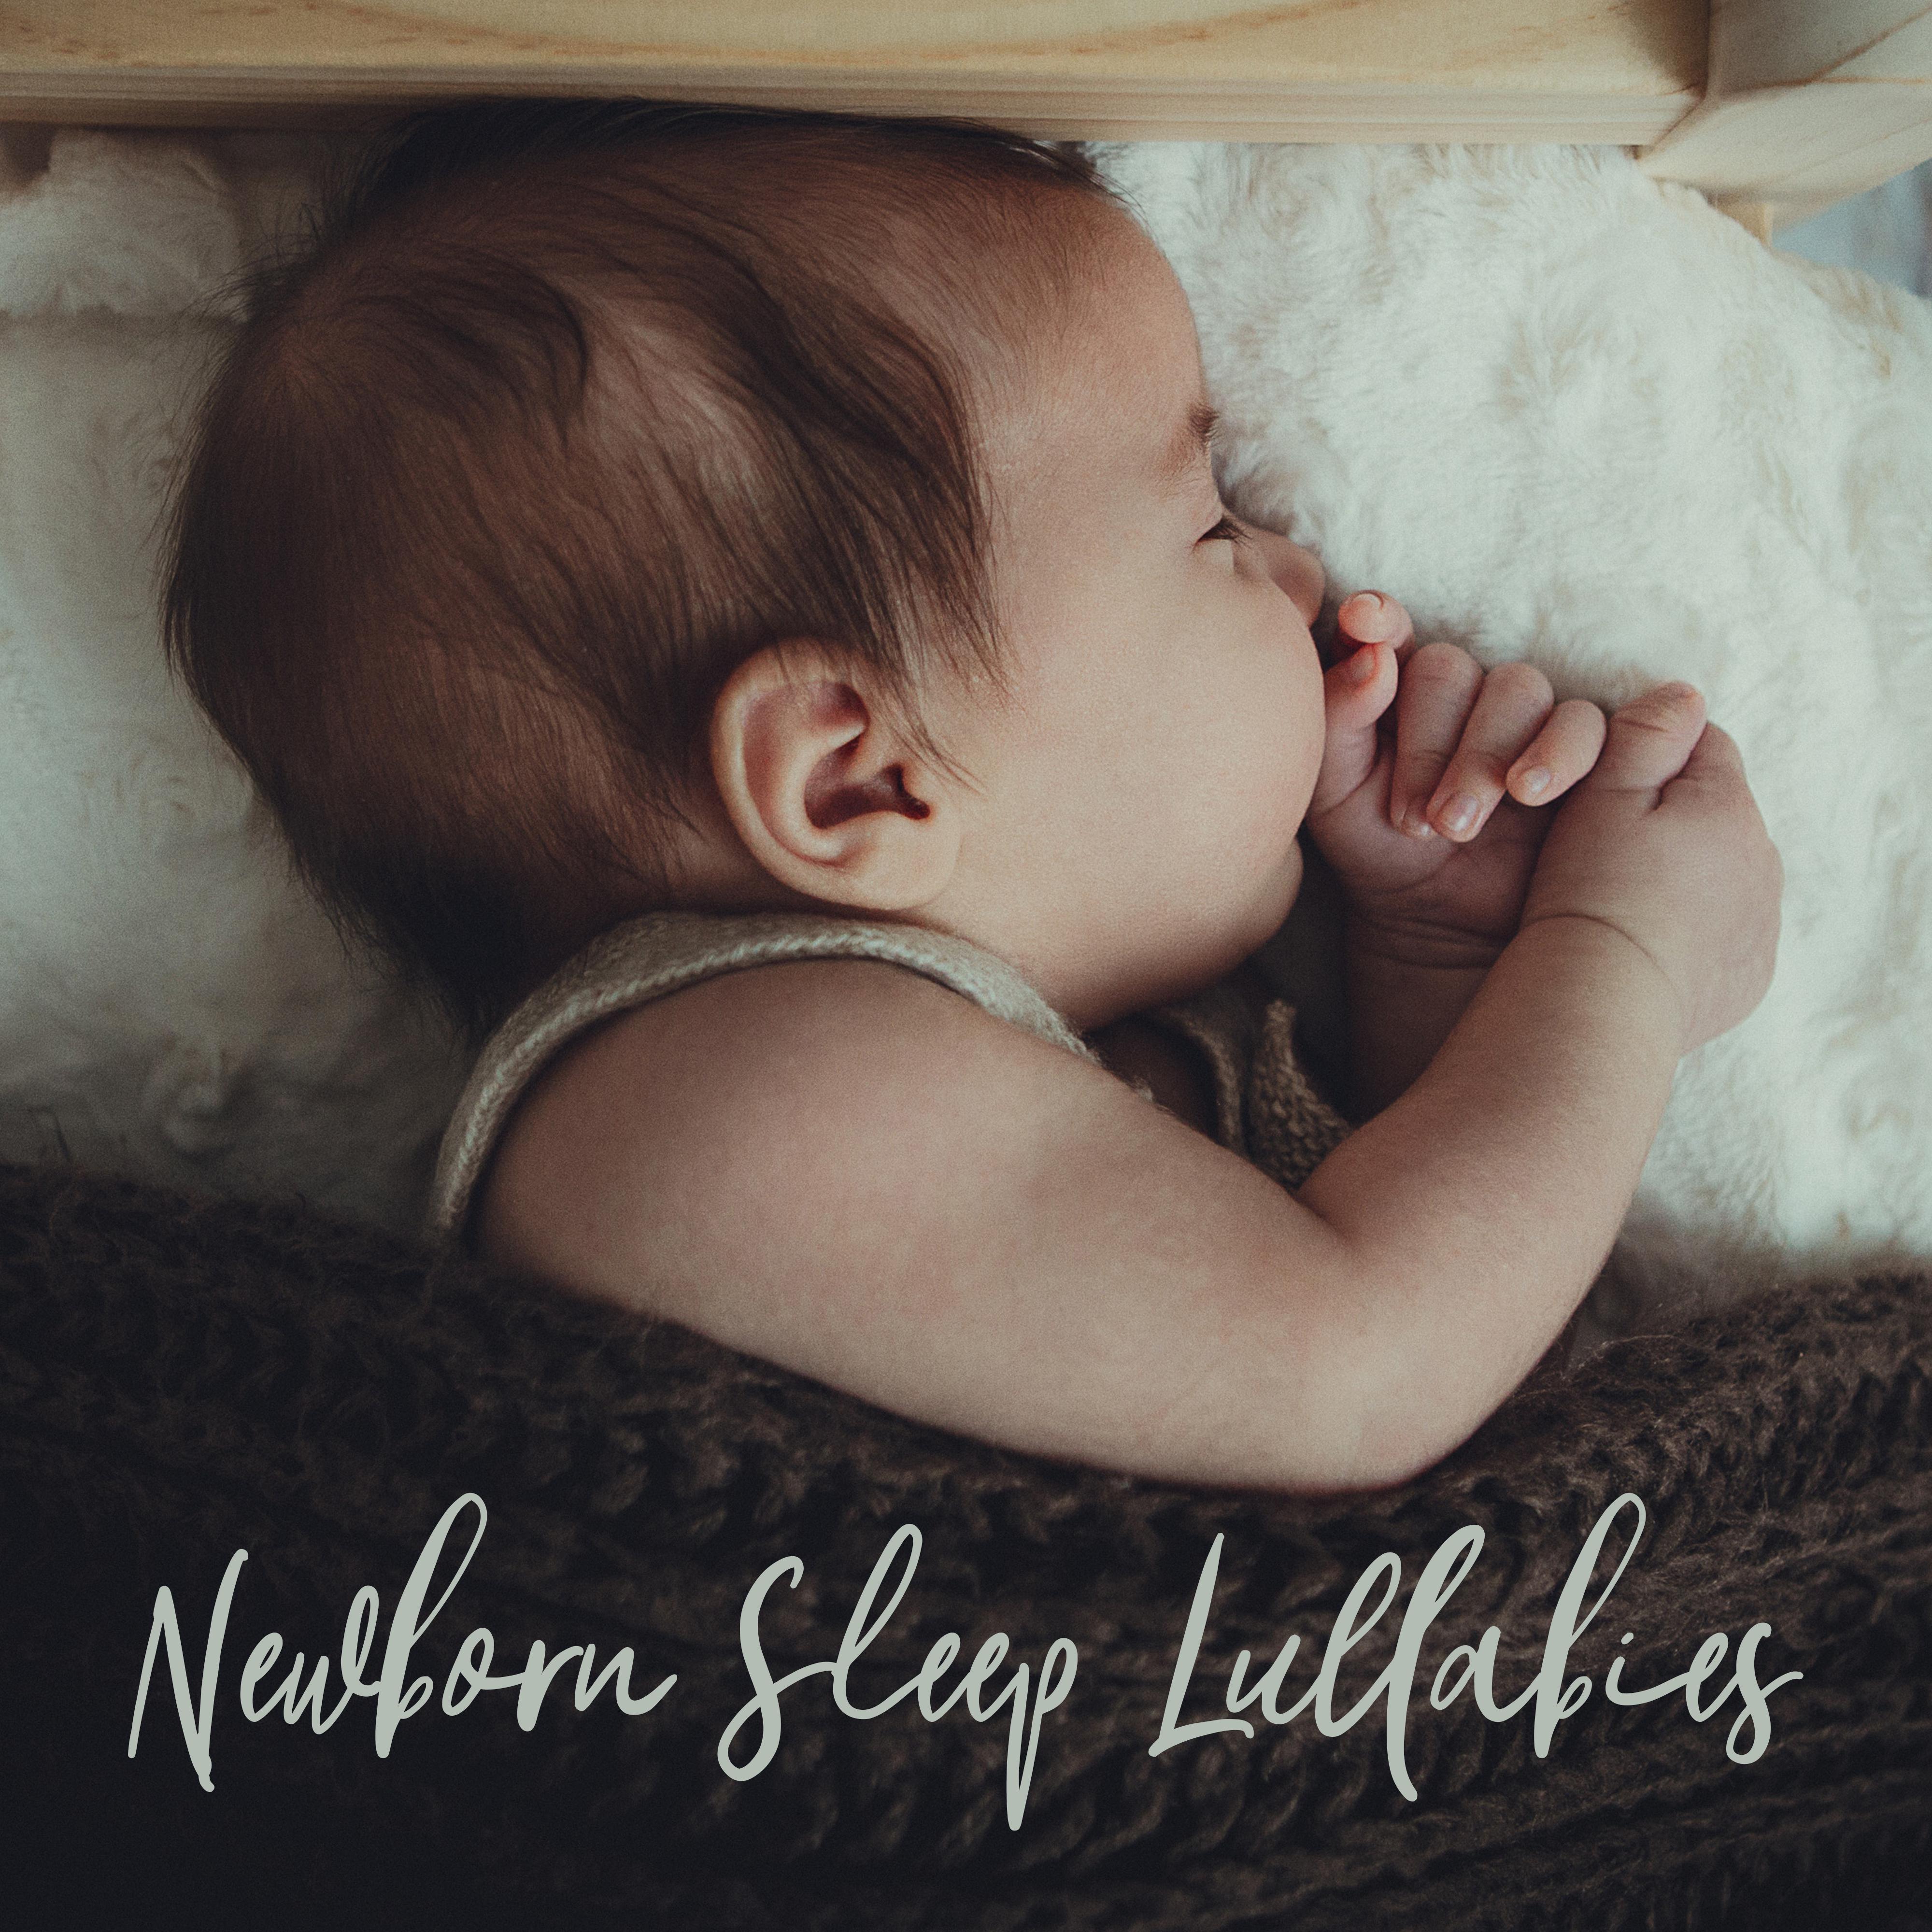 Newborn Sleep Lullabies; 15 Most Soothing New Age Songs for Babies, Remedies for Insomnia, Stress Relief, Calming Down